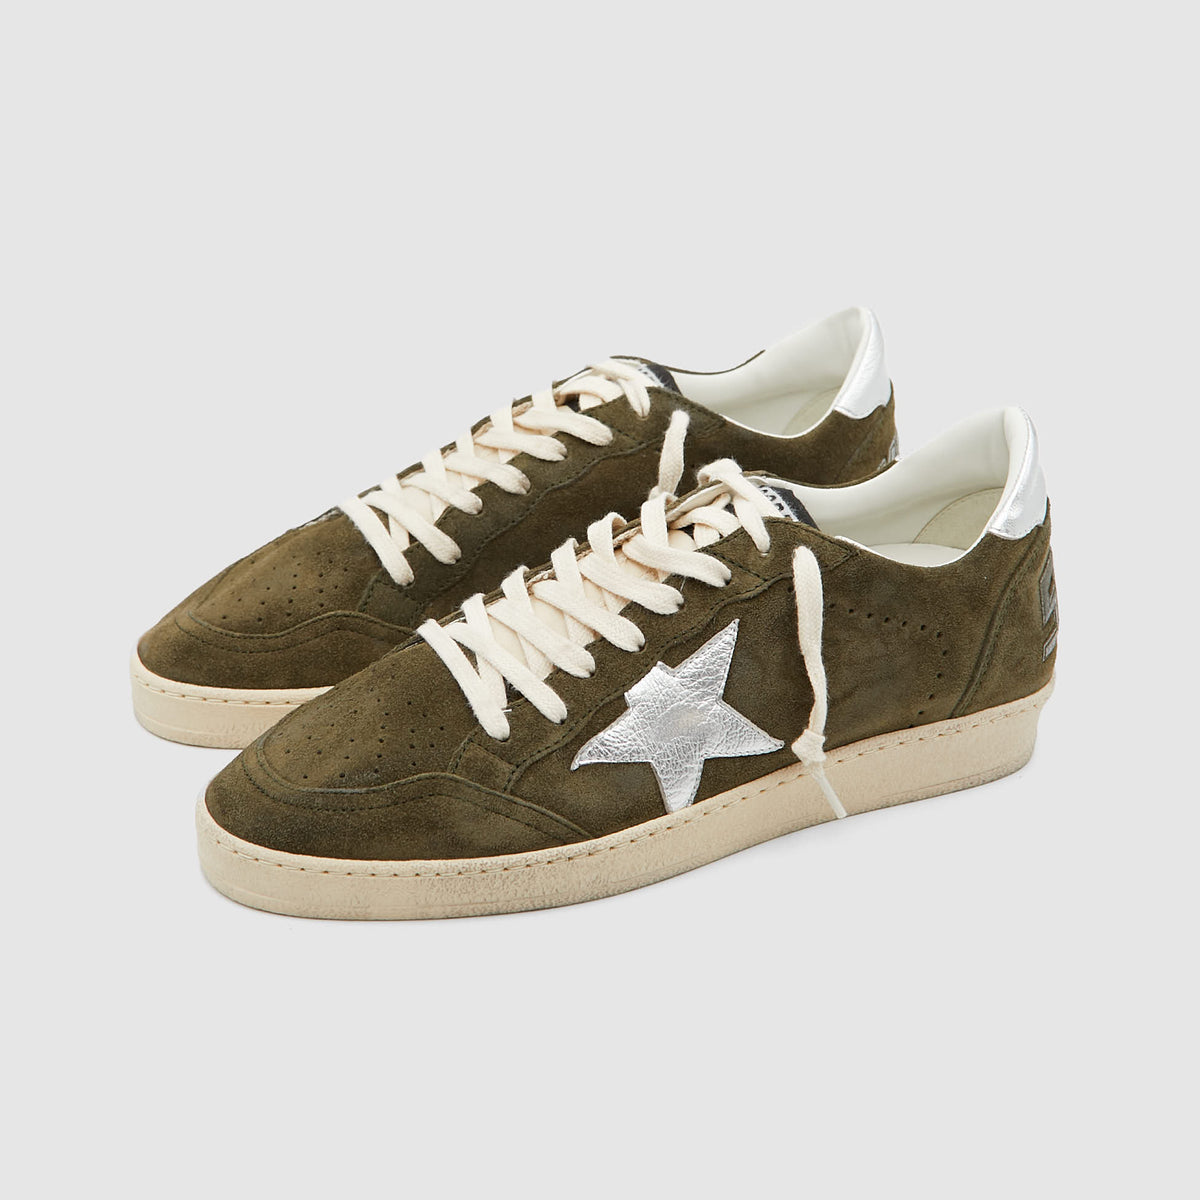 Golden Goose Ball Star Olive Night Silver Sneakers